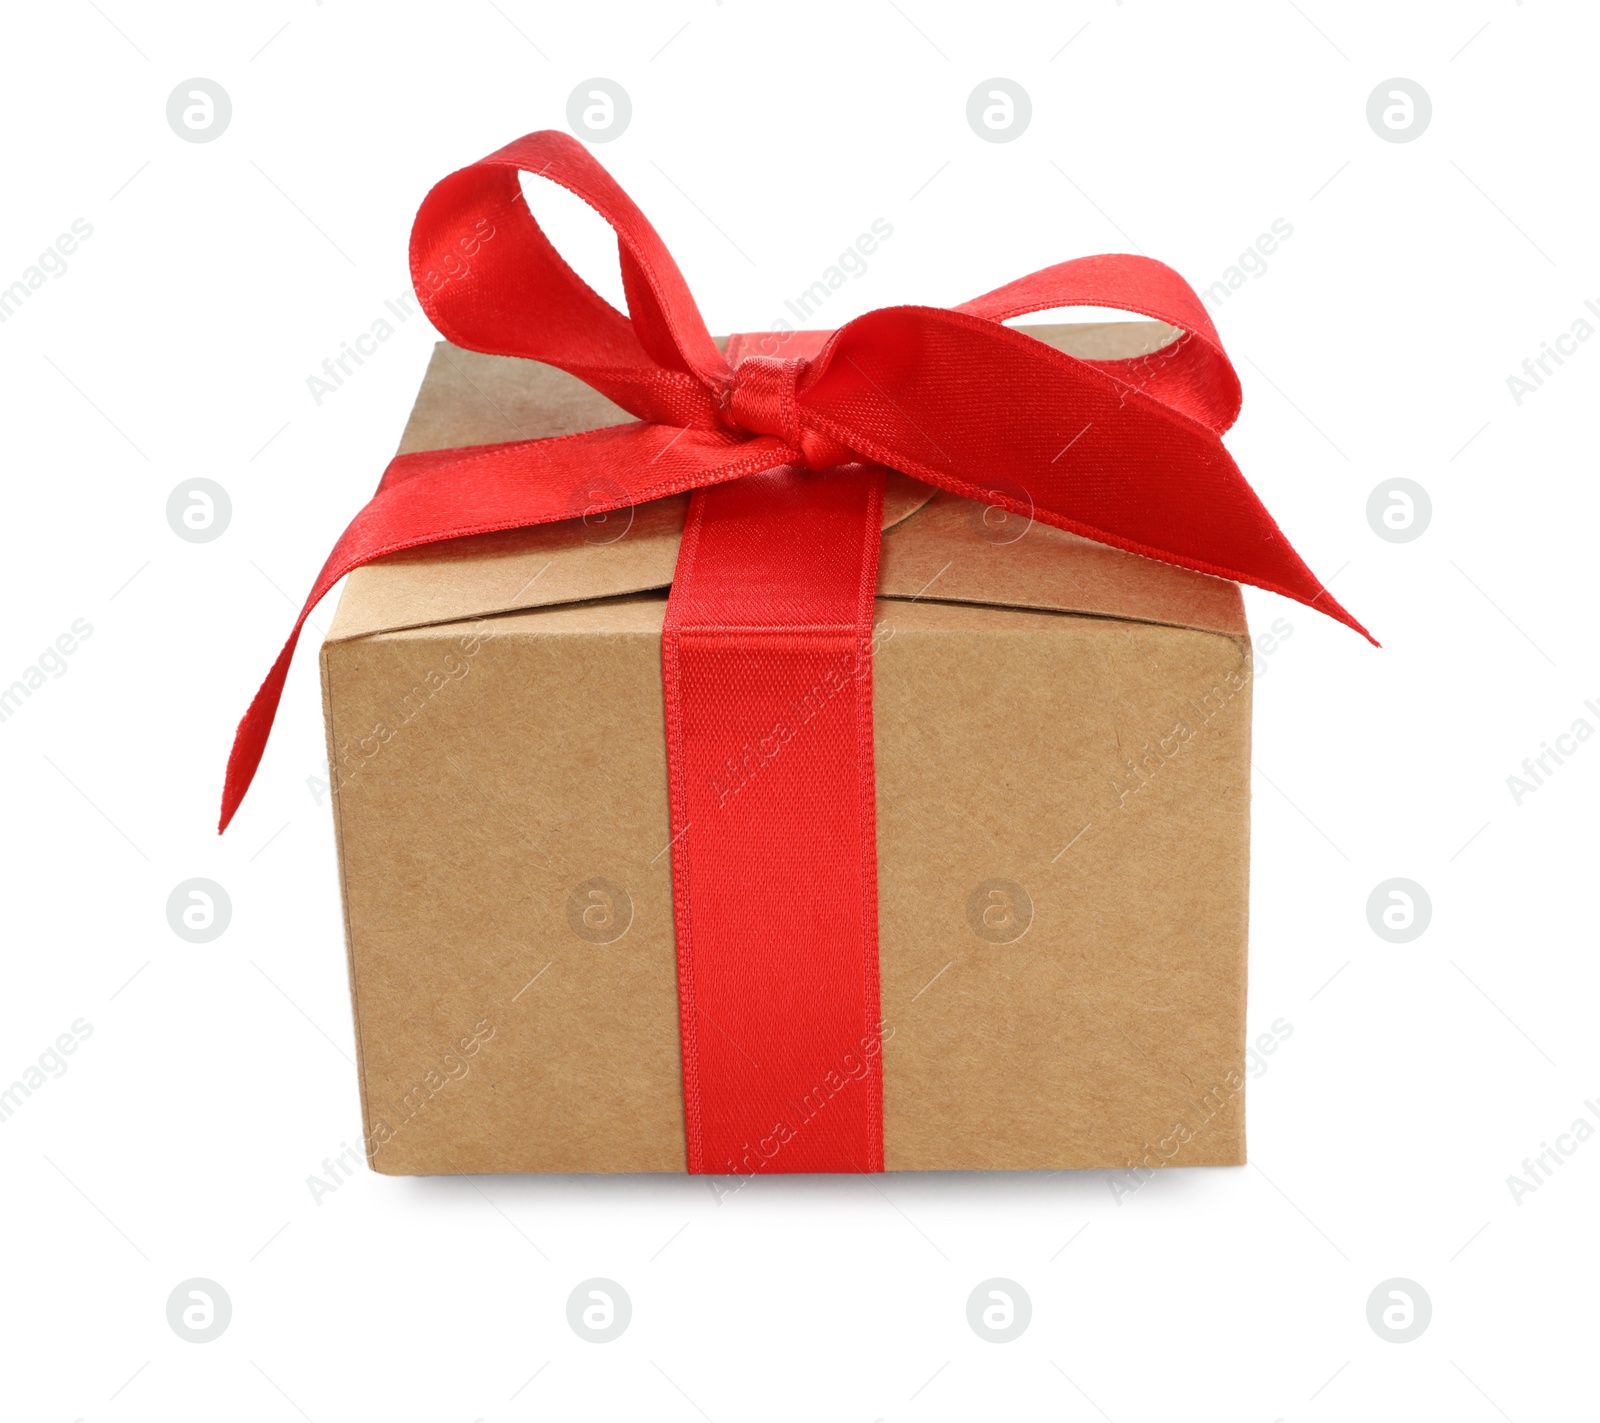 Photo of Christmas gift box decorated with red bow isolated on white